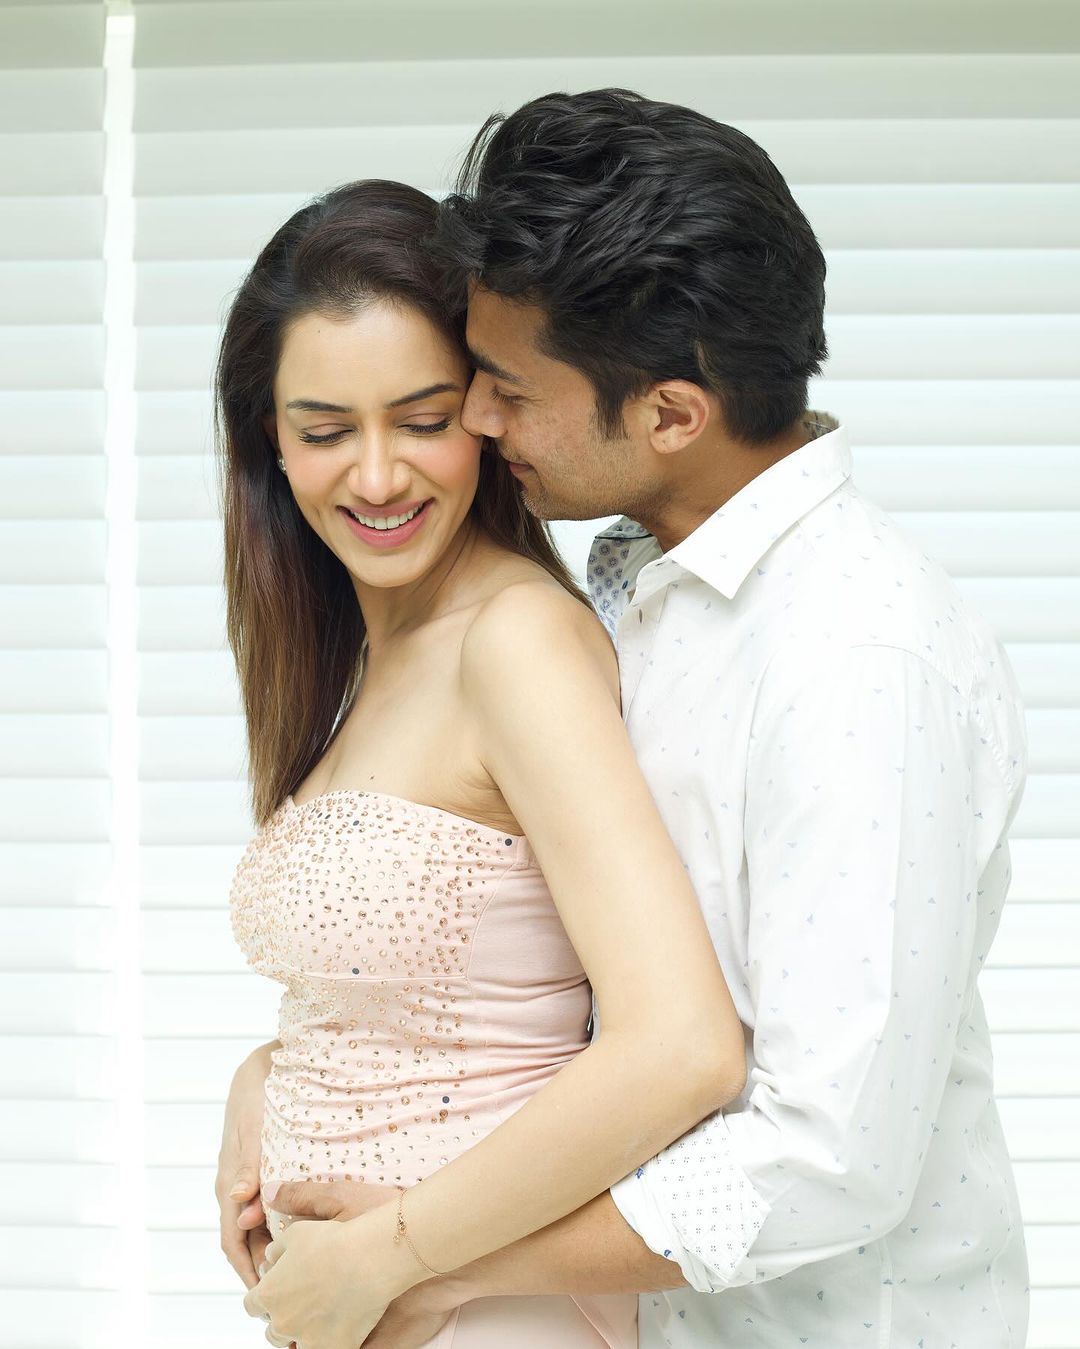 Second Pregnancy Post! Meri Aashiqui Tumse Hi Star announces Second Pregnancy with Baby Bump Post